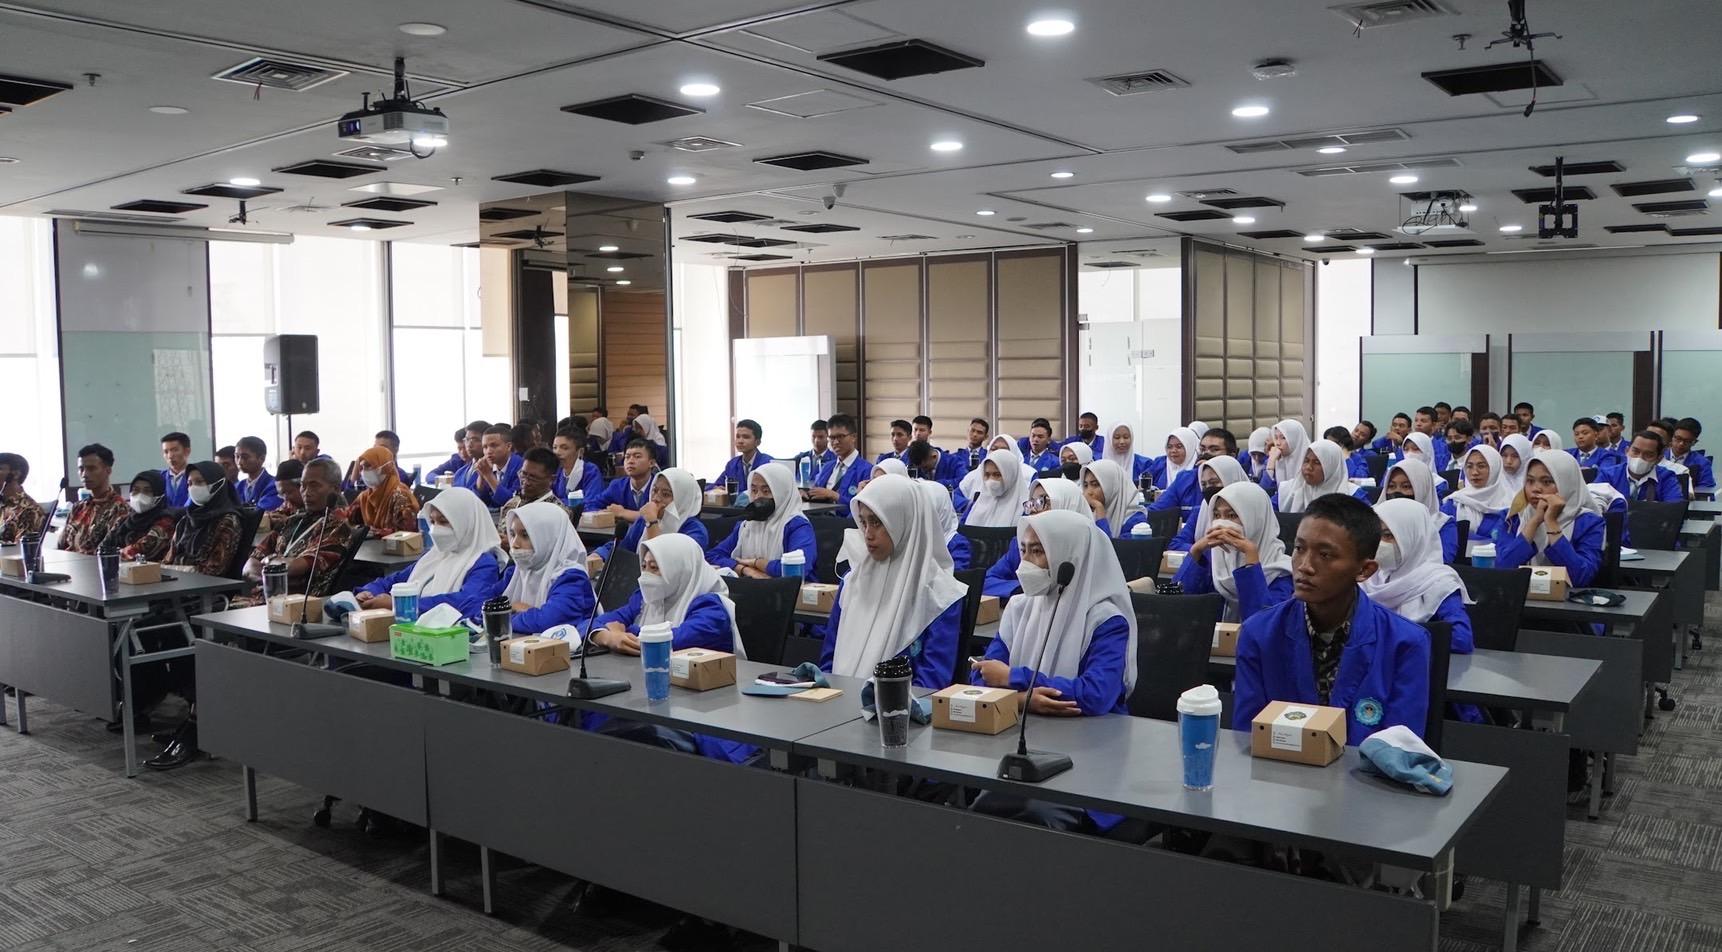 Bridging The World Of Education And Industry: WIKA Realty Shares Experience With SMKN 2 Yogyakarta